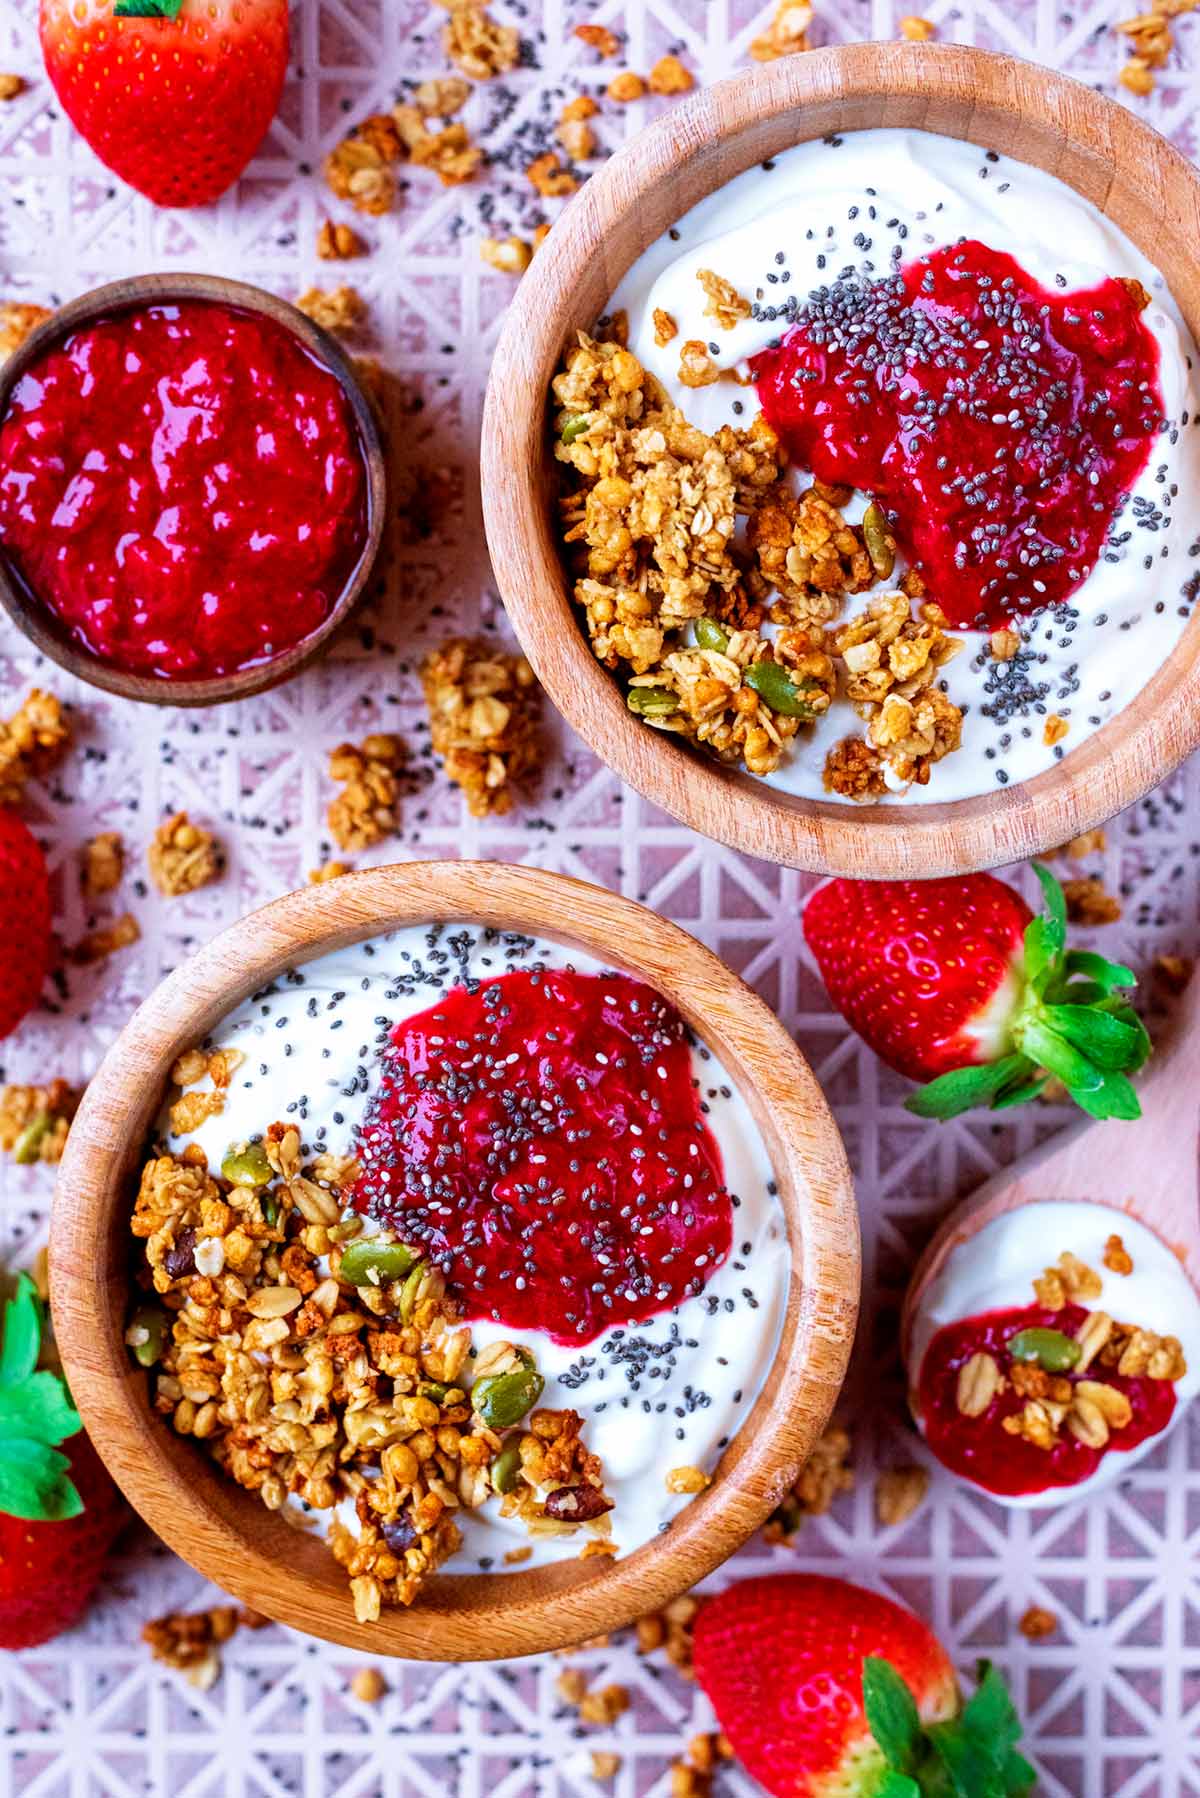 To bowls of yoghurt and granola with strawberry puree on top. Fresh strawberries surround the bowls.